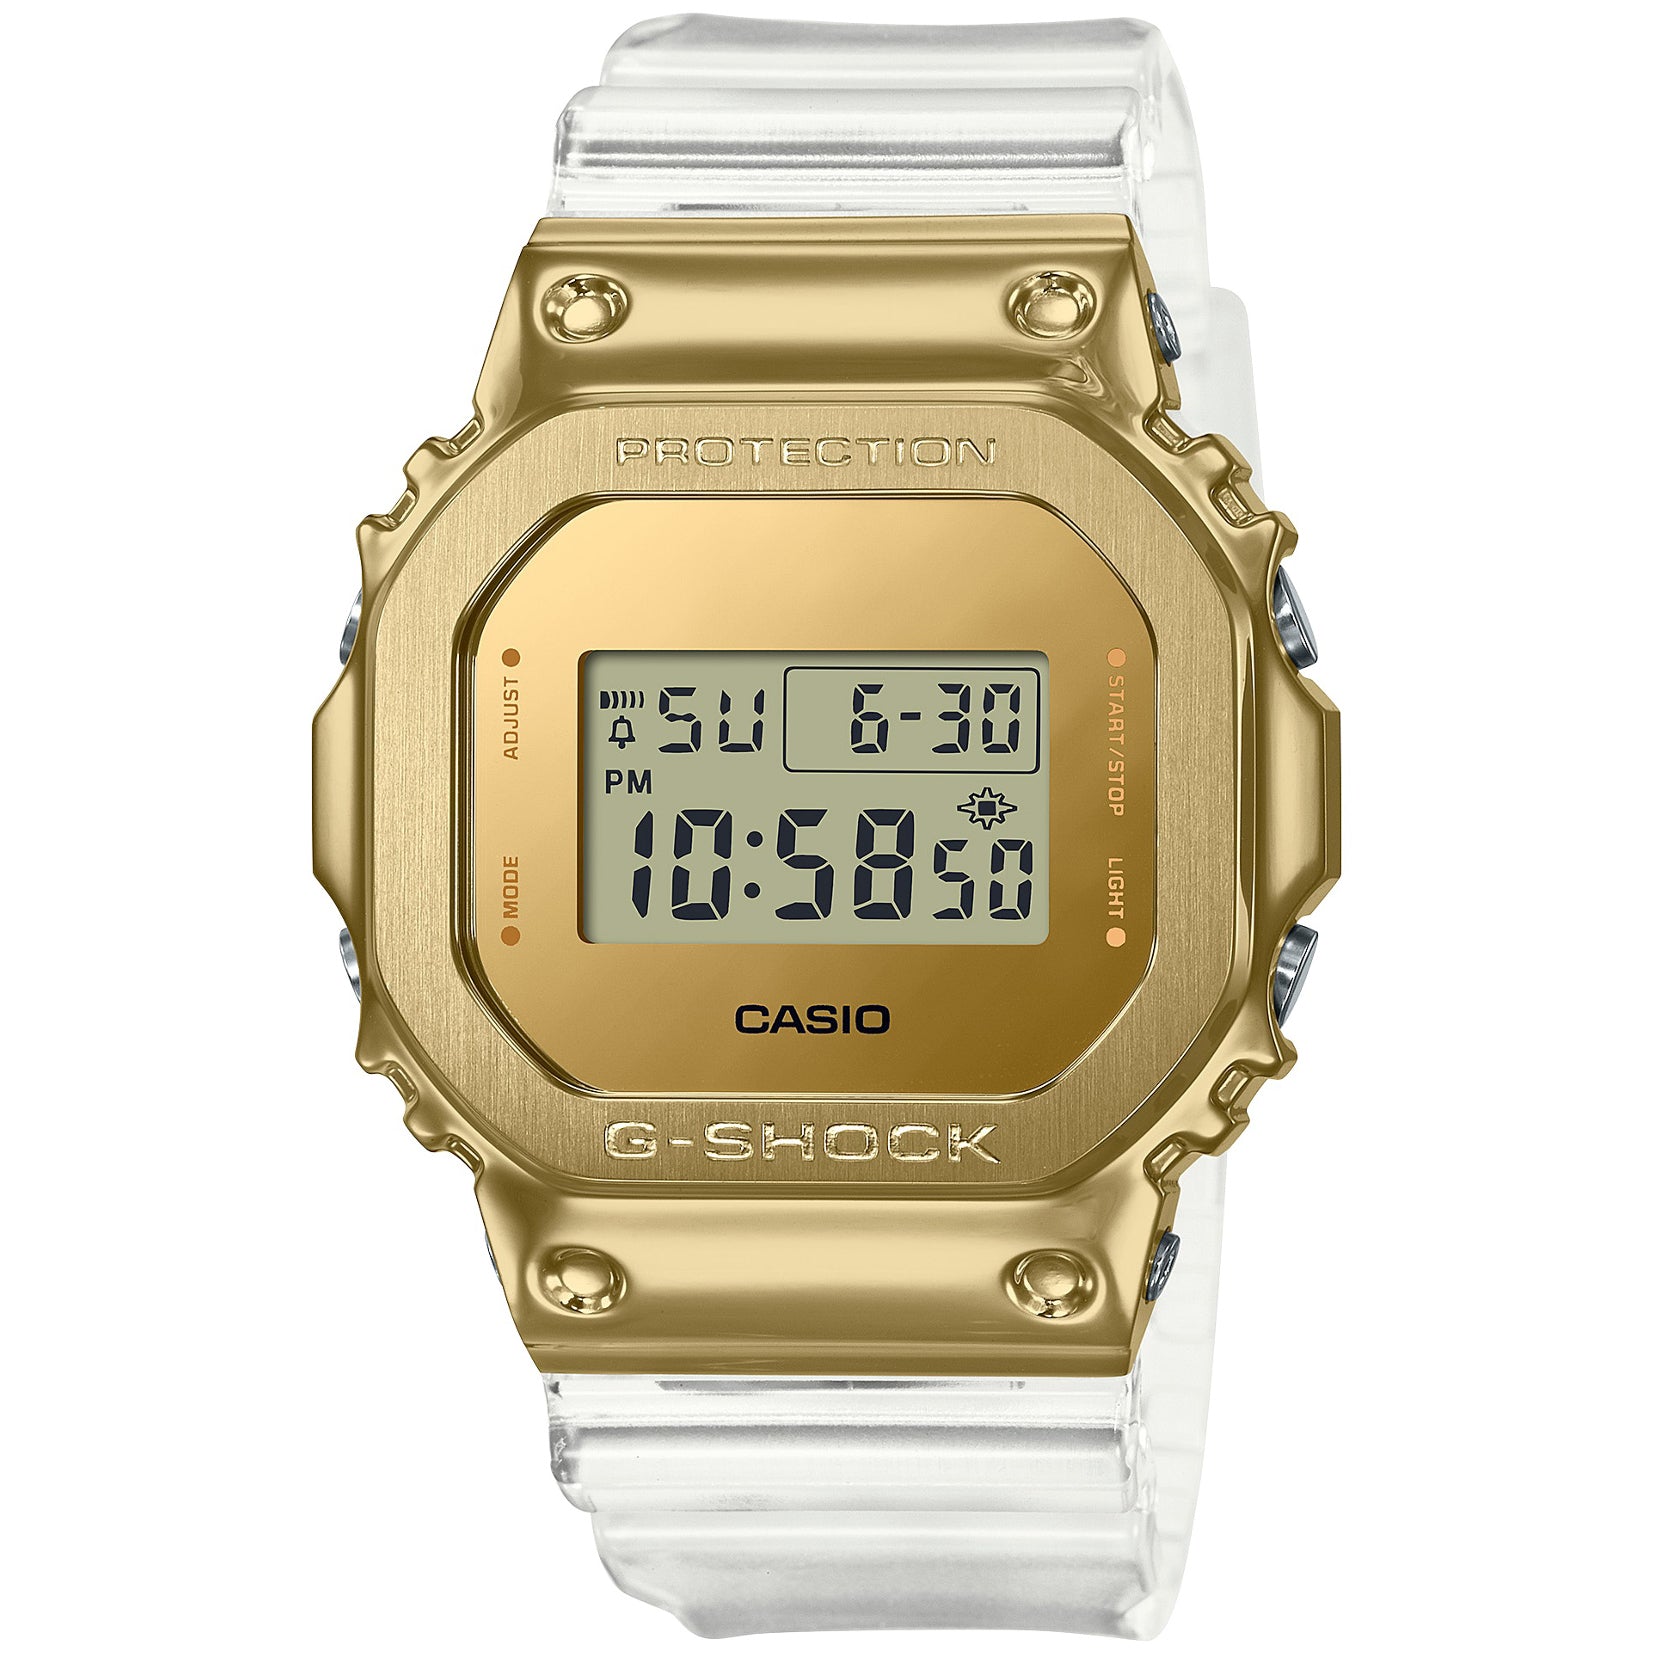 G-Shock GM5600 Gold Ingot Limited Edition | Watches.com